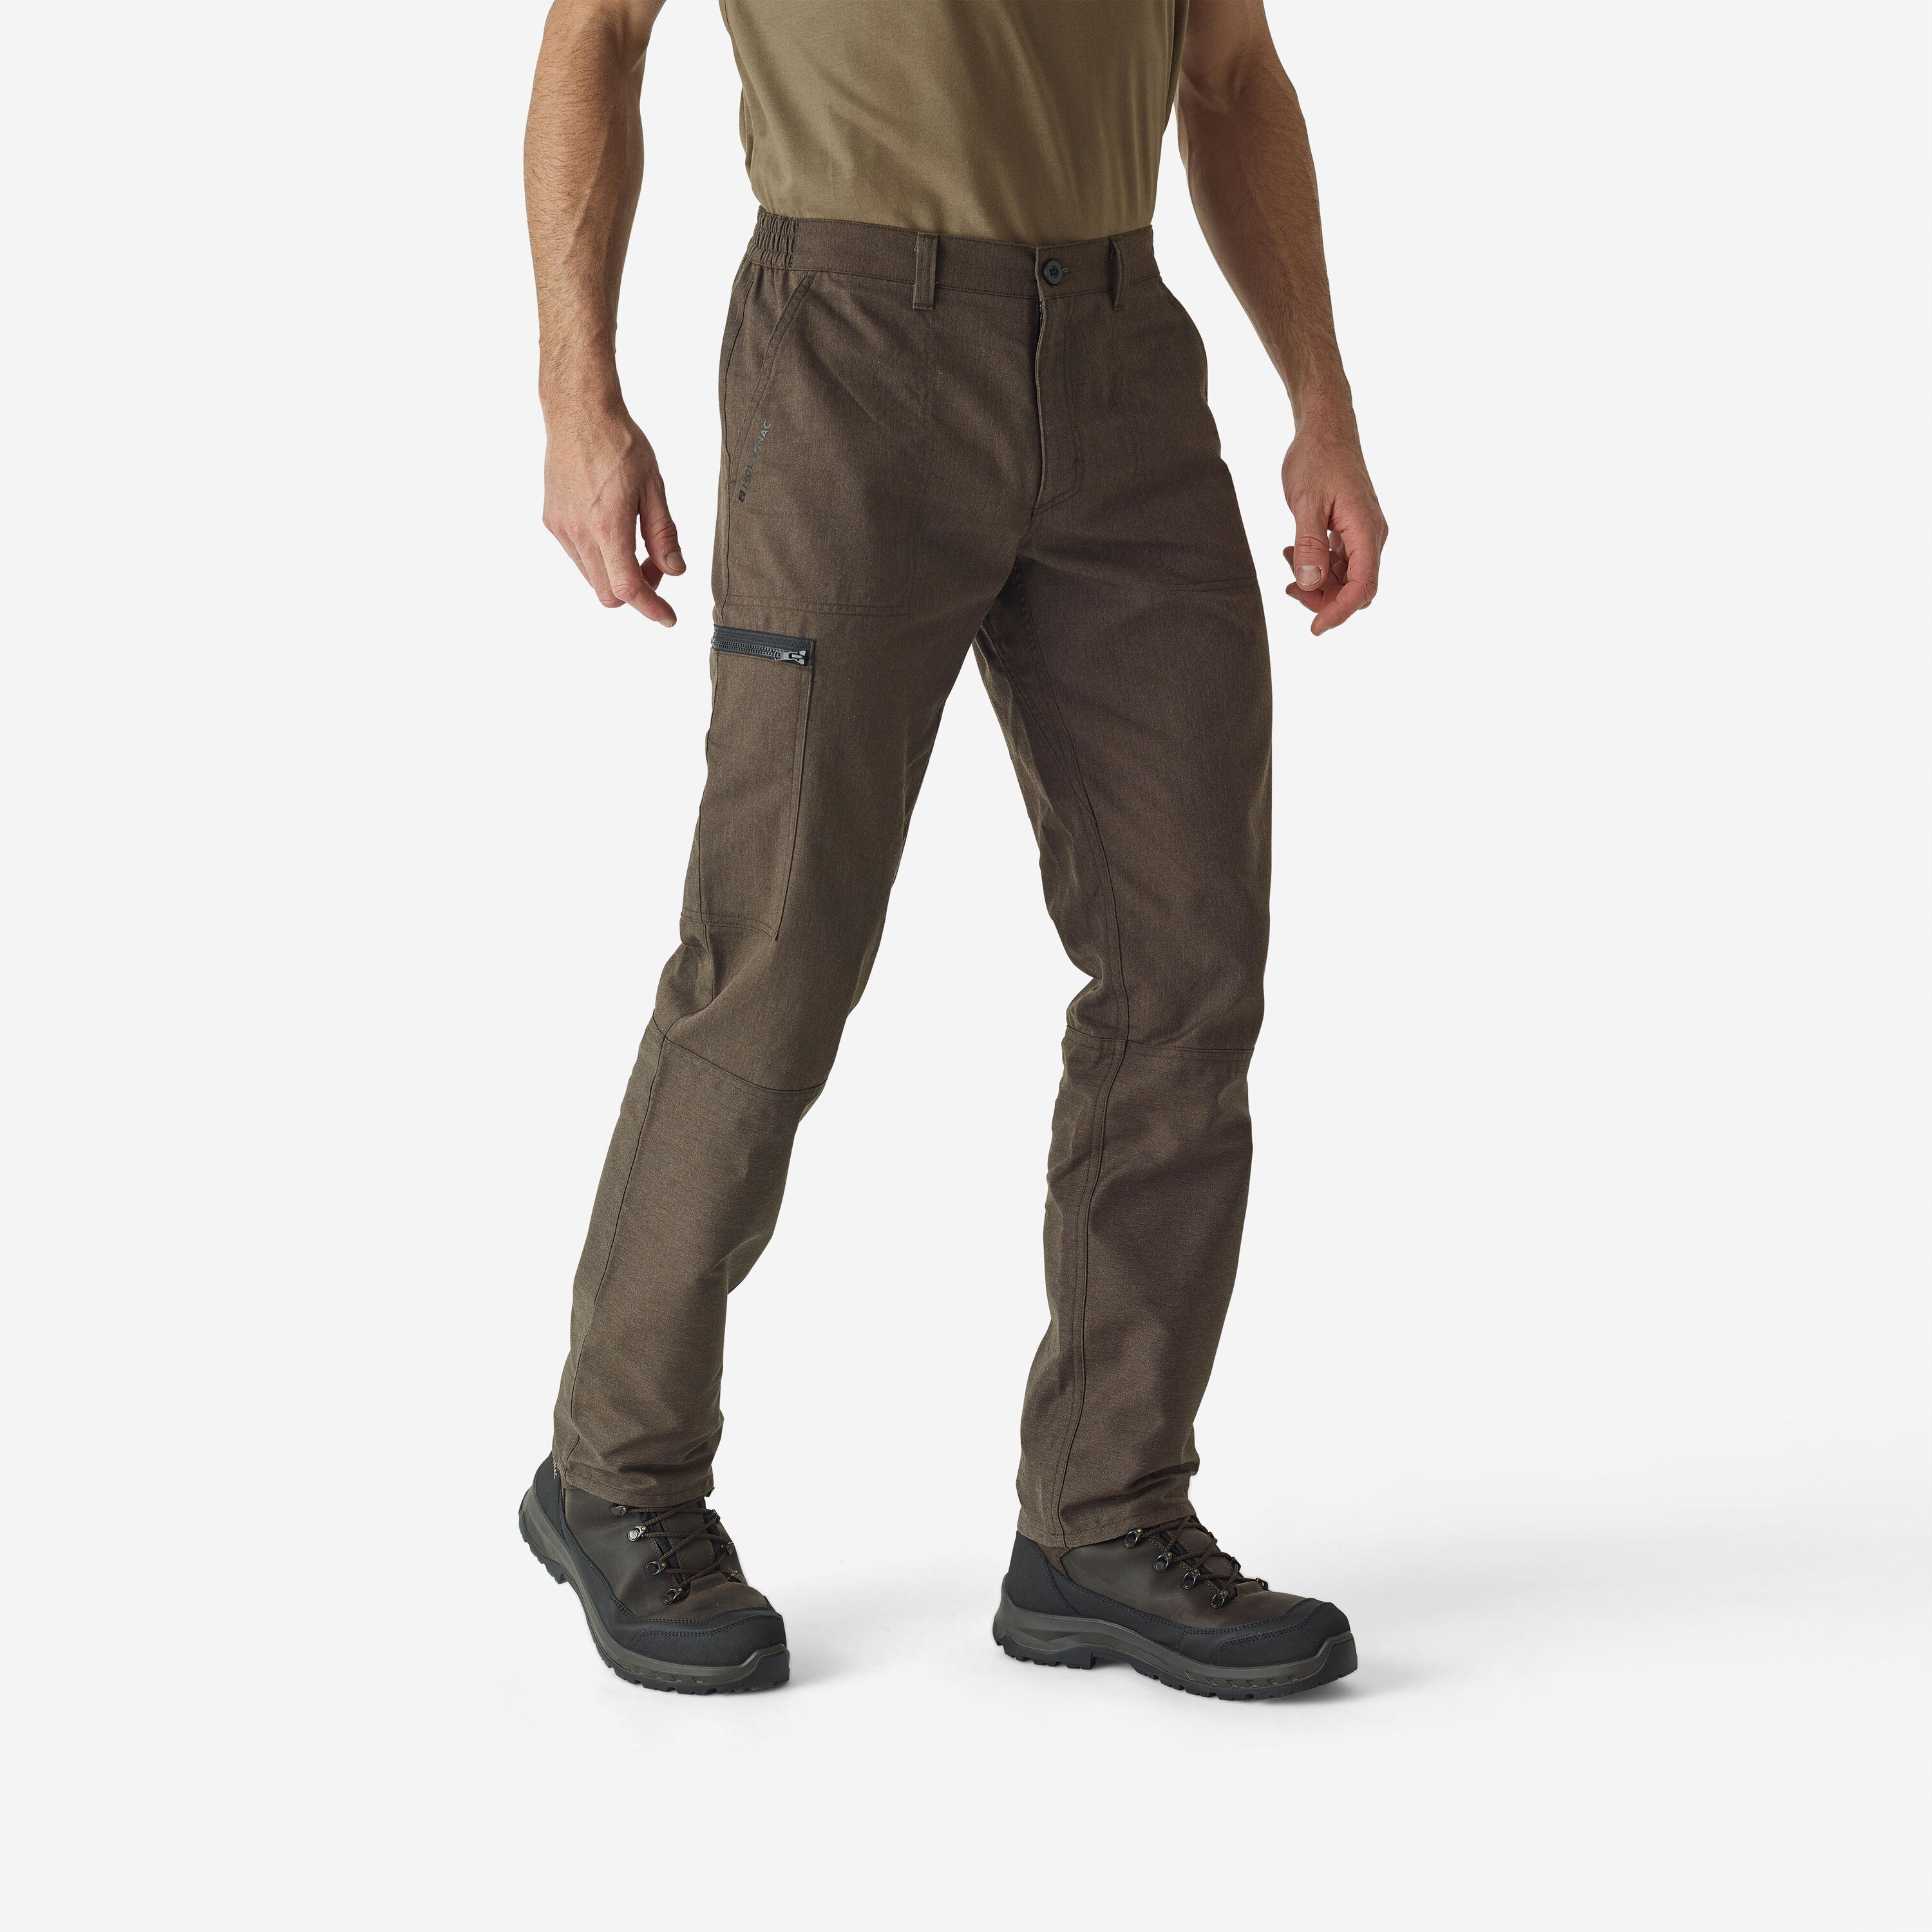 Breathable trousers